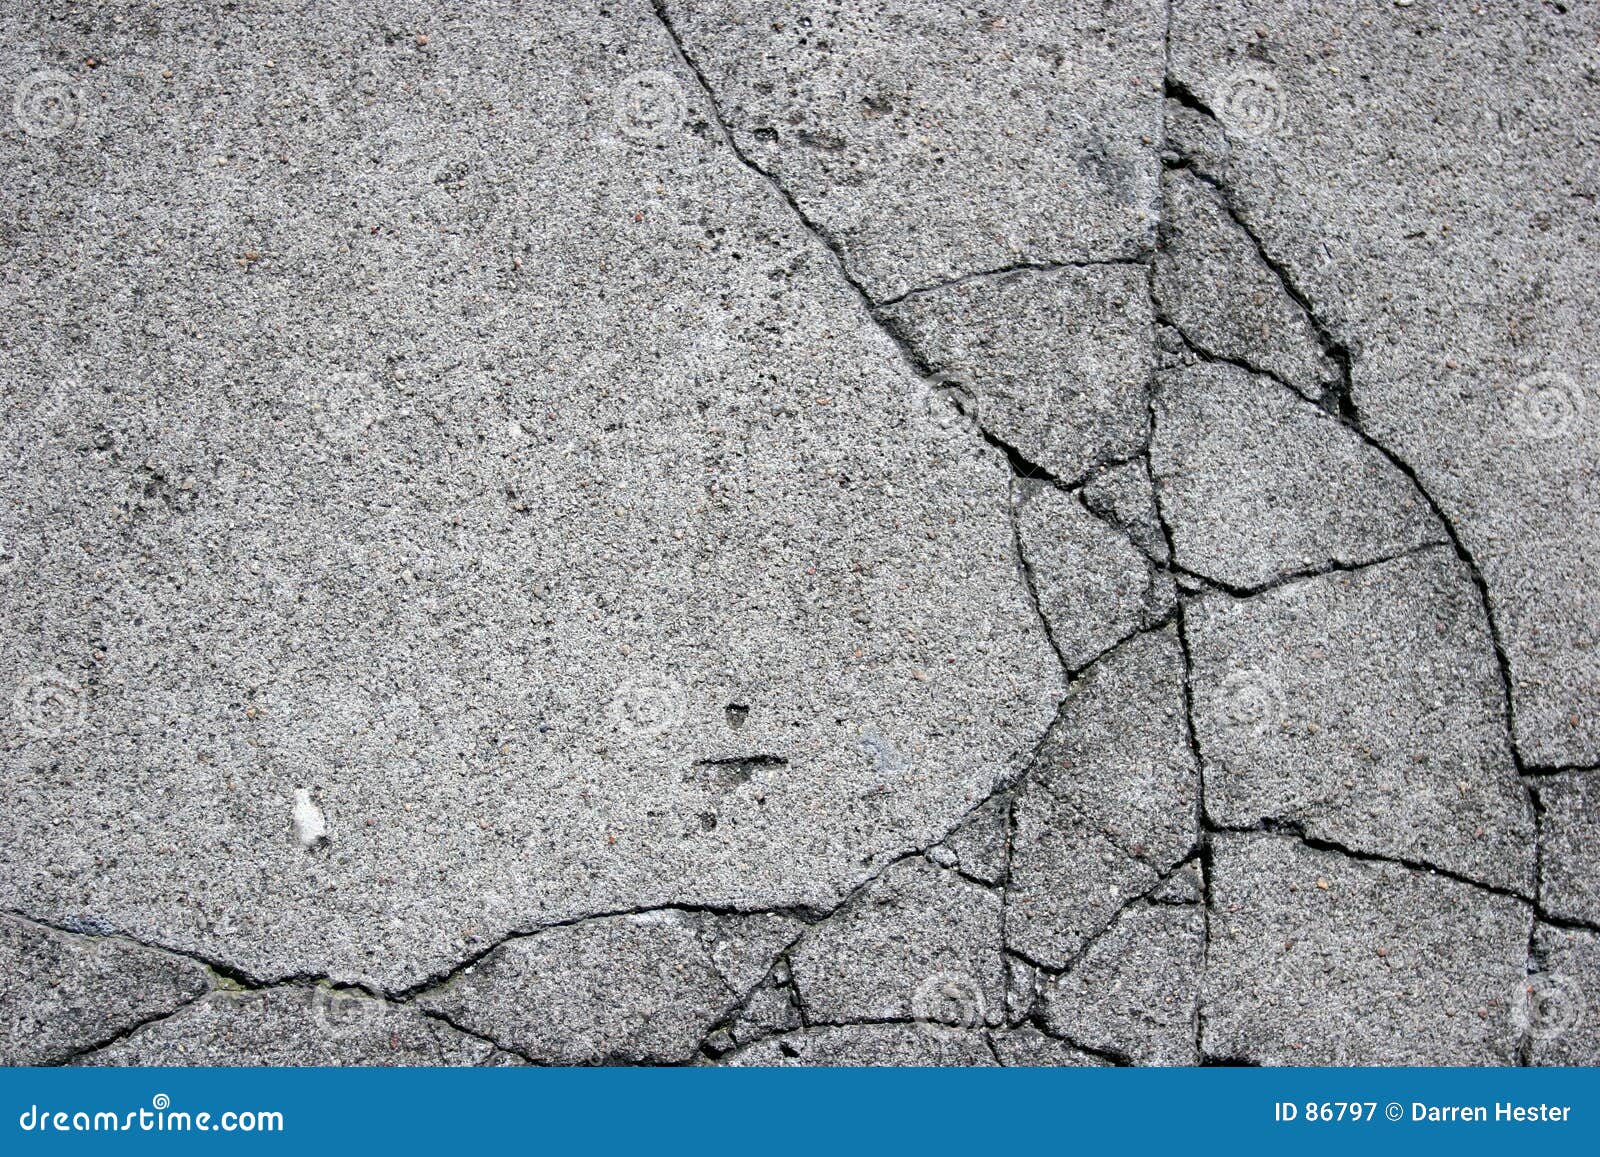 Concrete Texture Royalty Free Stock Photography - Image: 86797